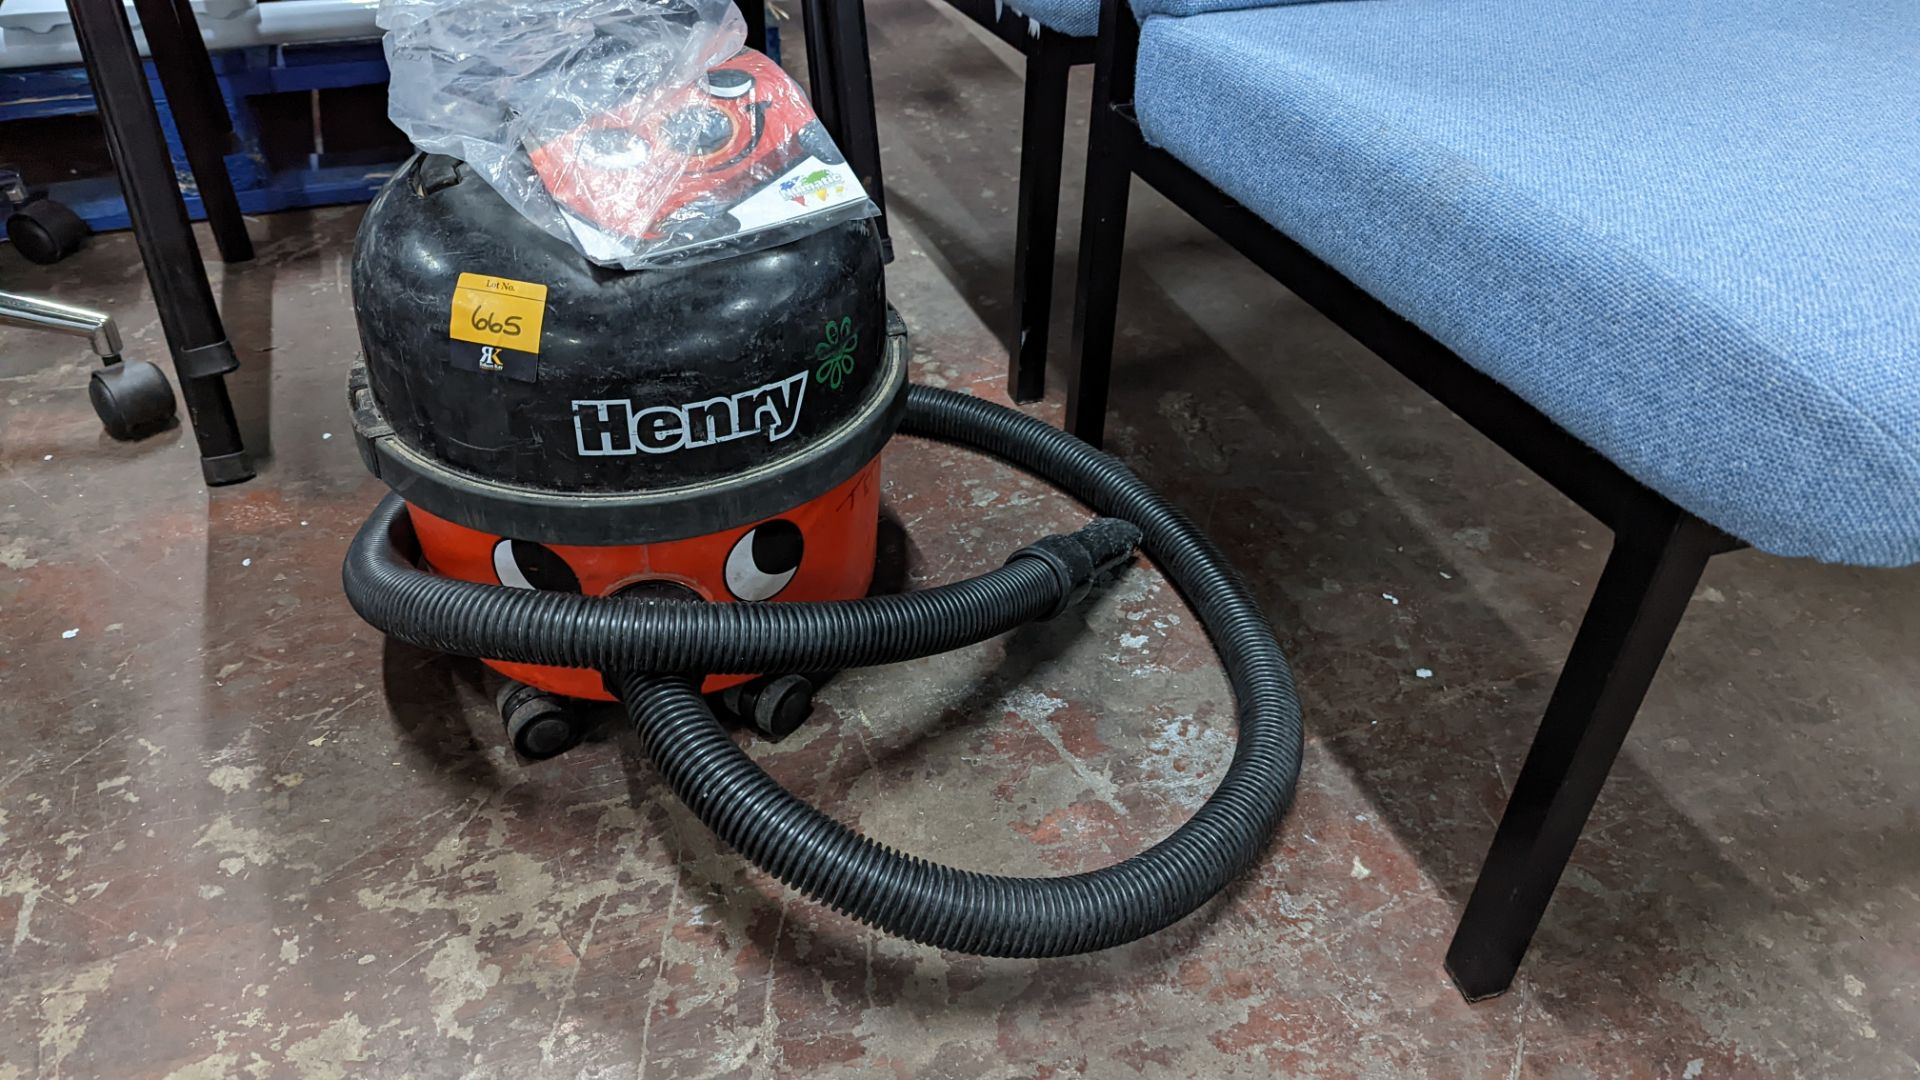 Henry vacuum cleaner - Image 4 of 5